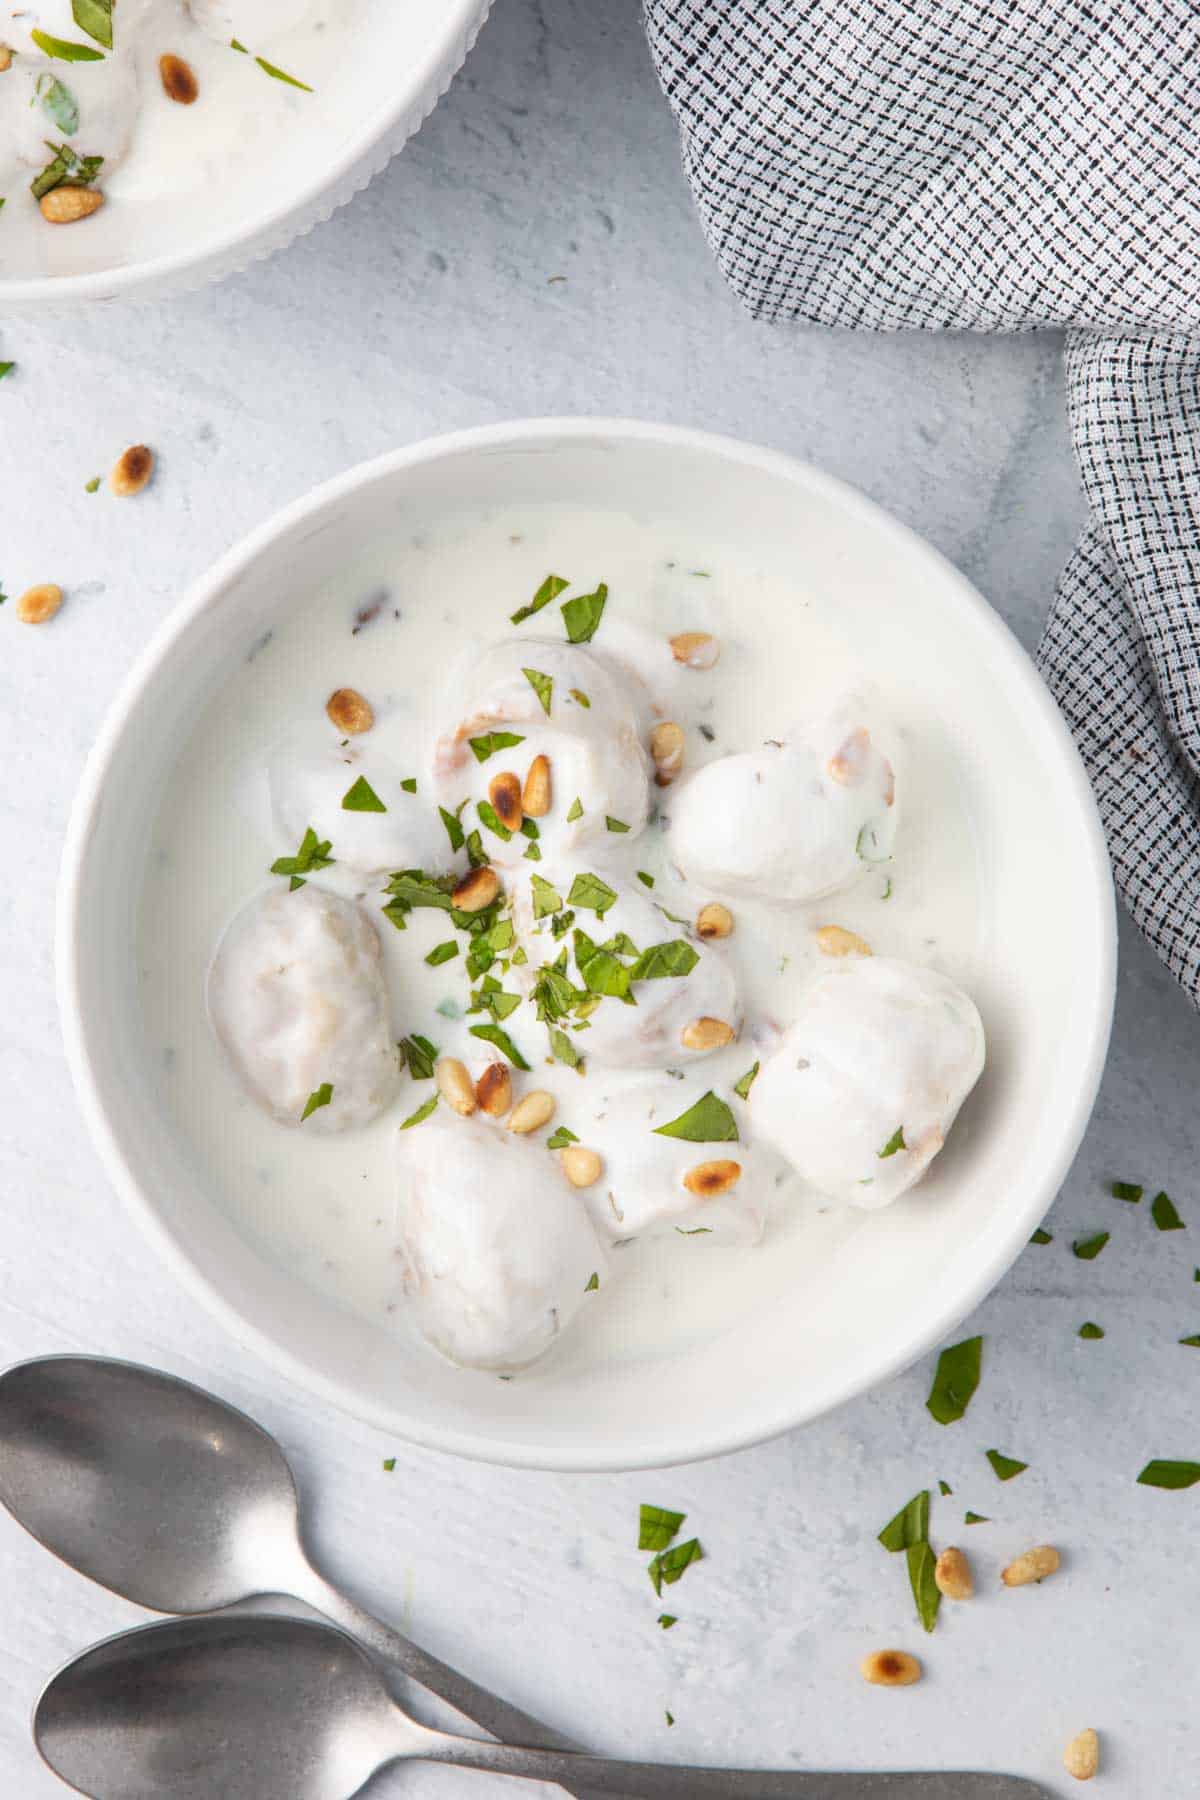 Bowl of shish barak in a creamy yogurt sauce garnished with extra pine nuts and chopped parsley, two spoons resting nearby.